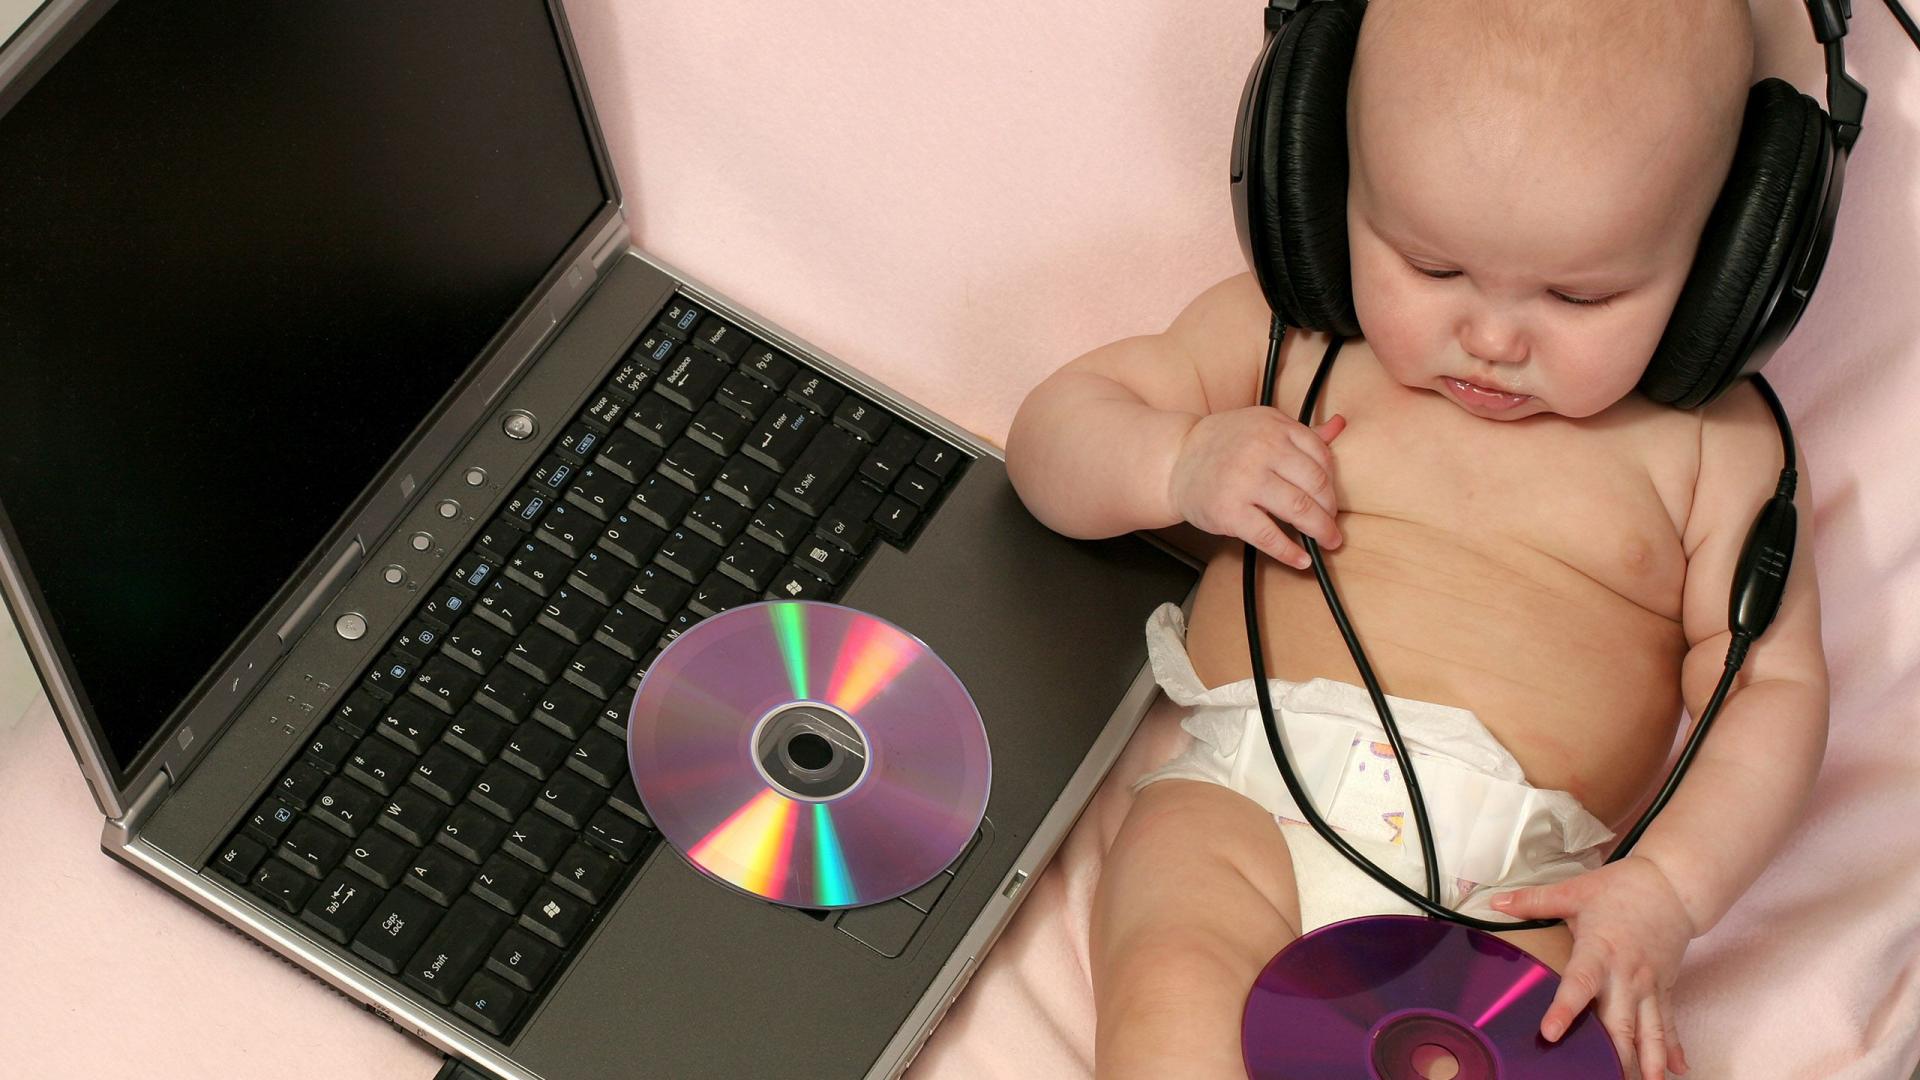 Baby Wallpaper Free Download - Very Funny Wallpaper Download , HD Wallpaper & Backgrounds